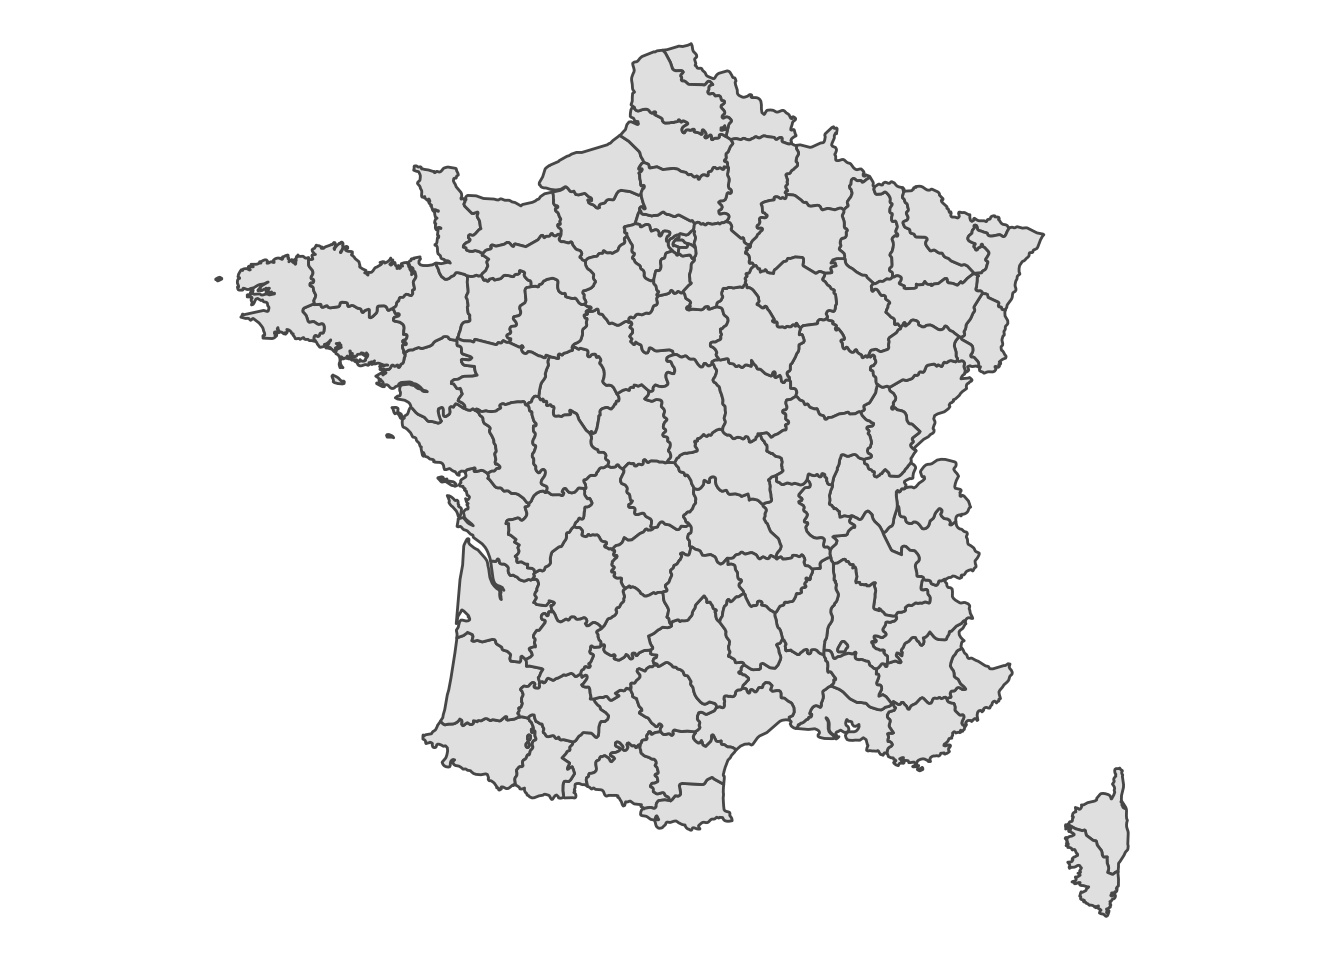 A grey outline of France and its districts, shaded in light grey.